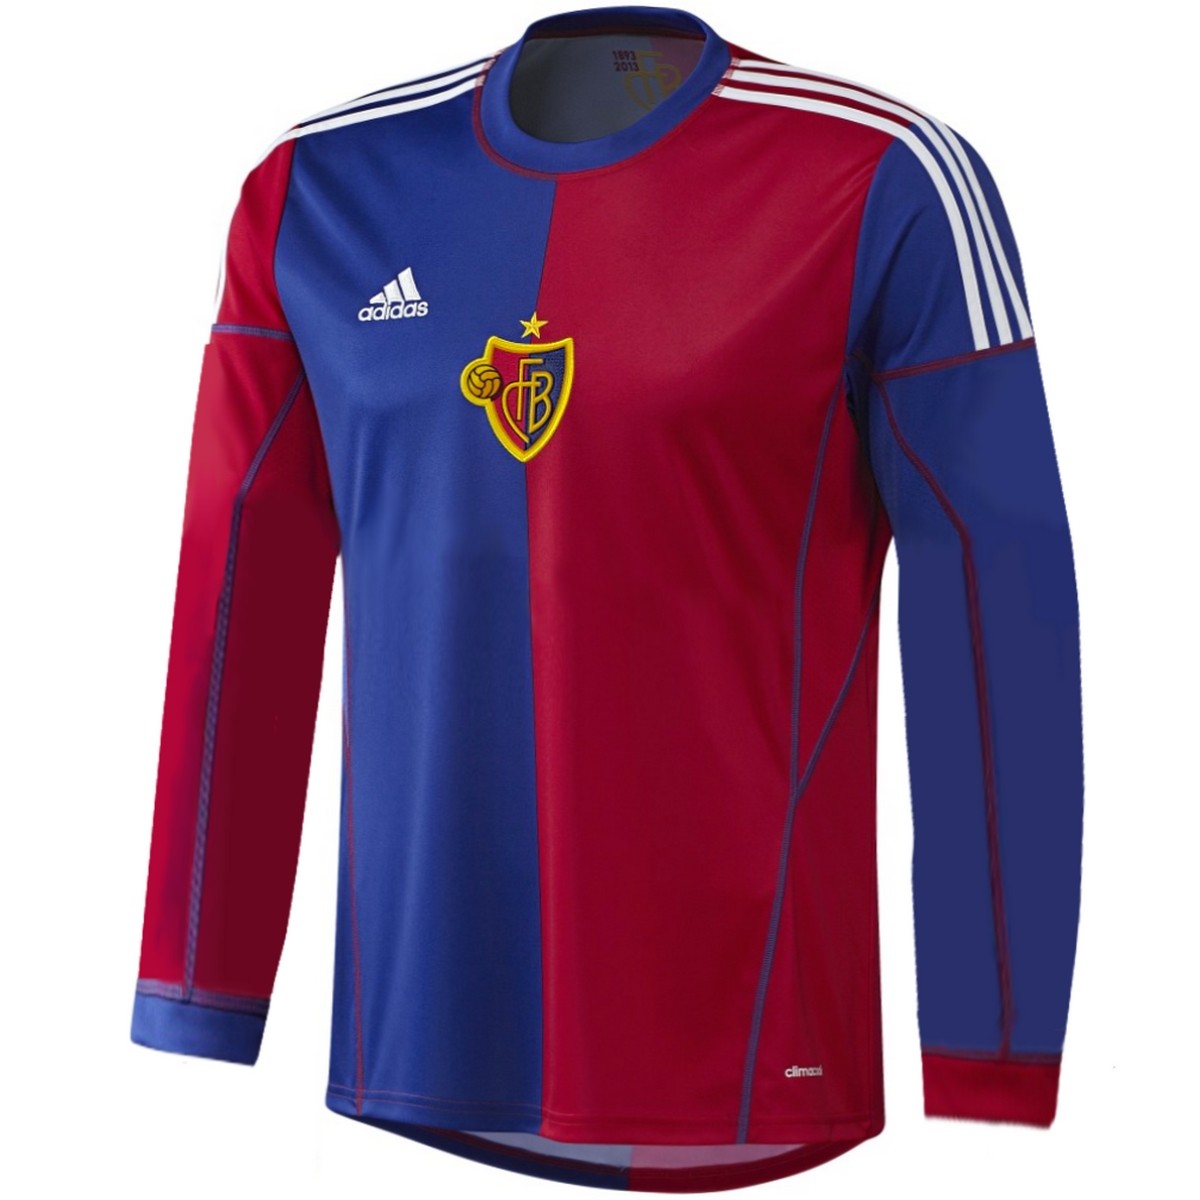 Mor Markeret erosion FC Basel Home football shirt 2013/14 Player Issue - Adidas - SportingPlus -  Passion for Sport